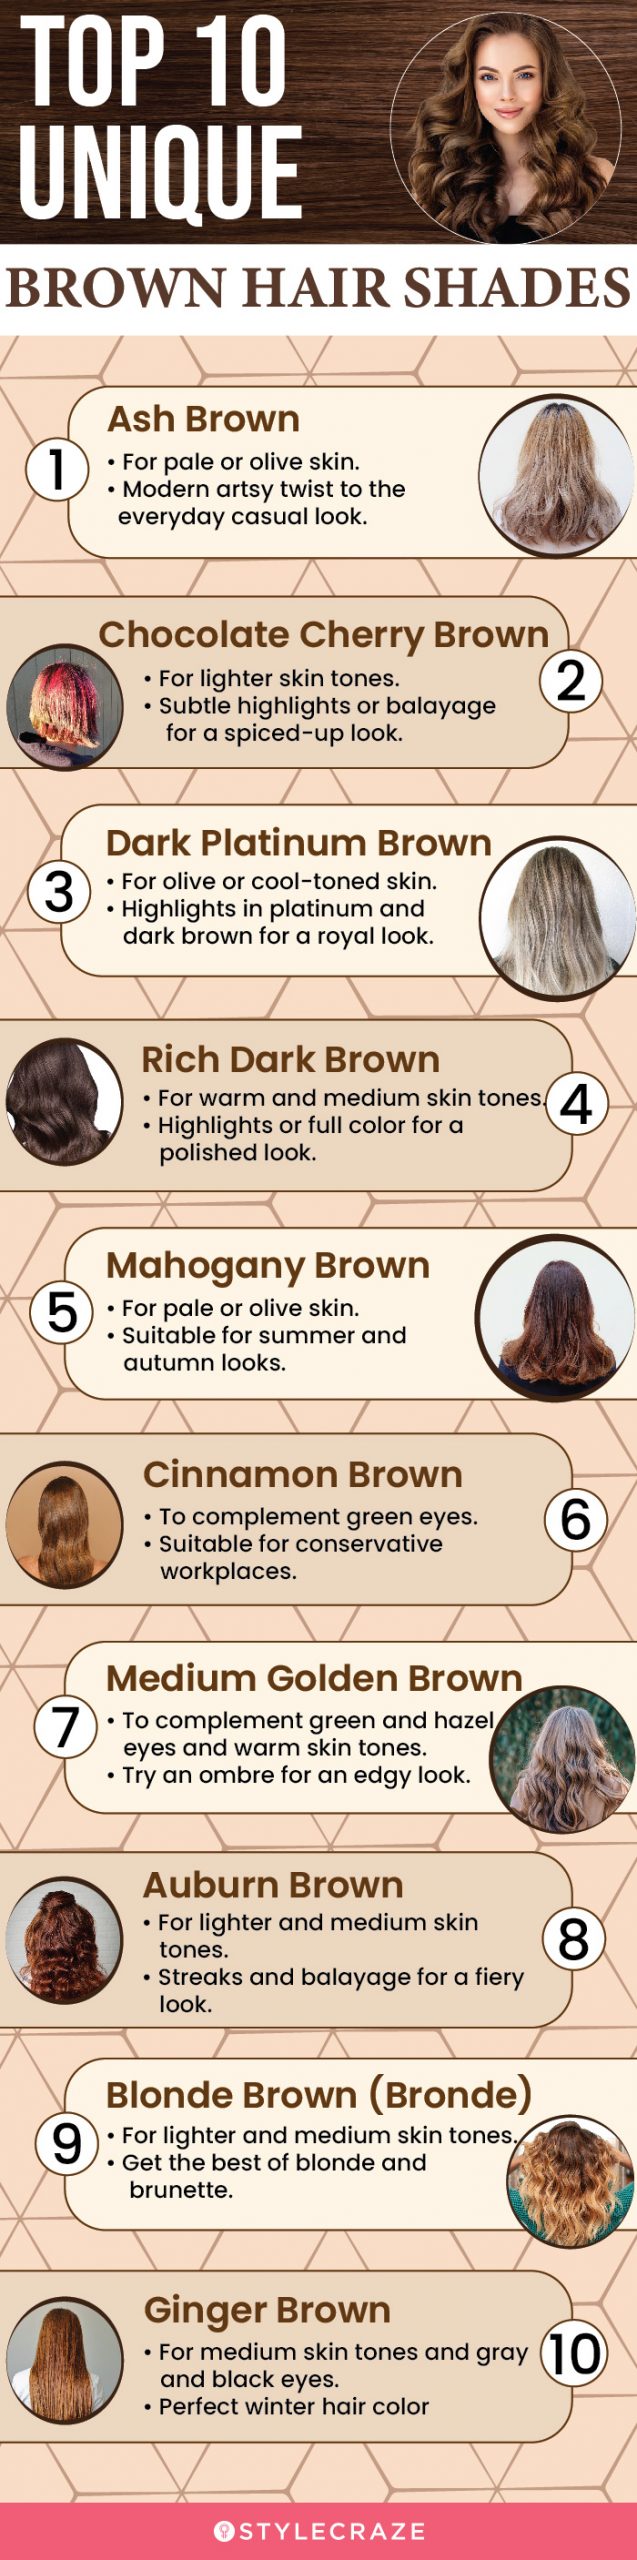 top 10 unique brown hair shades (infographic)